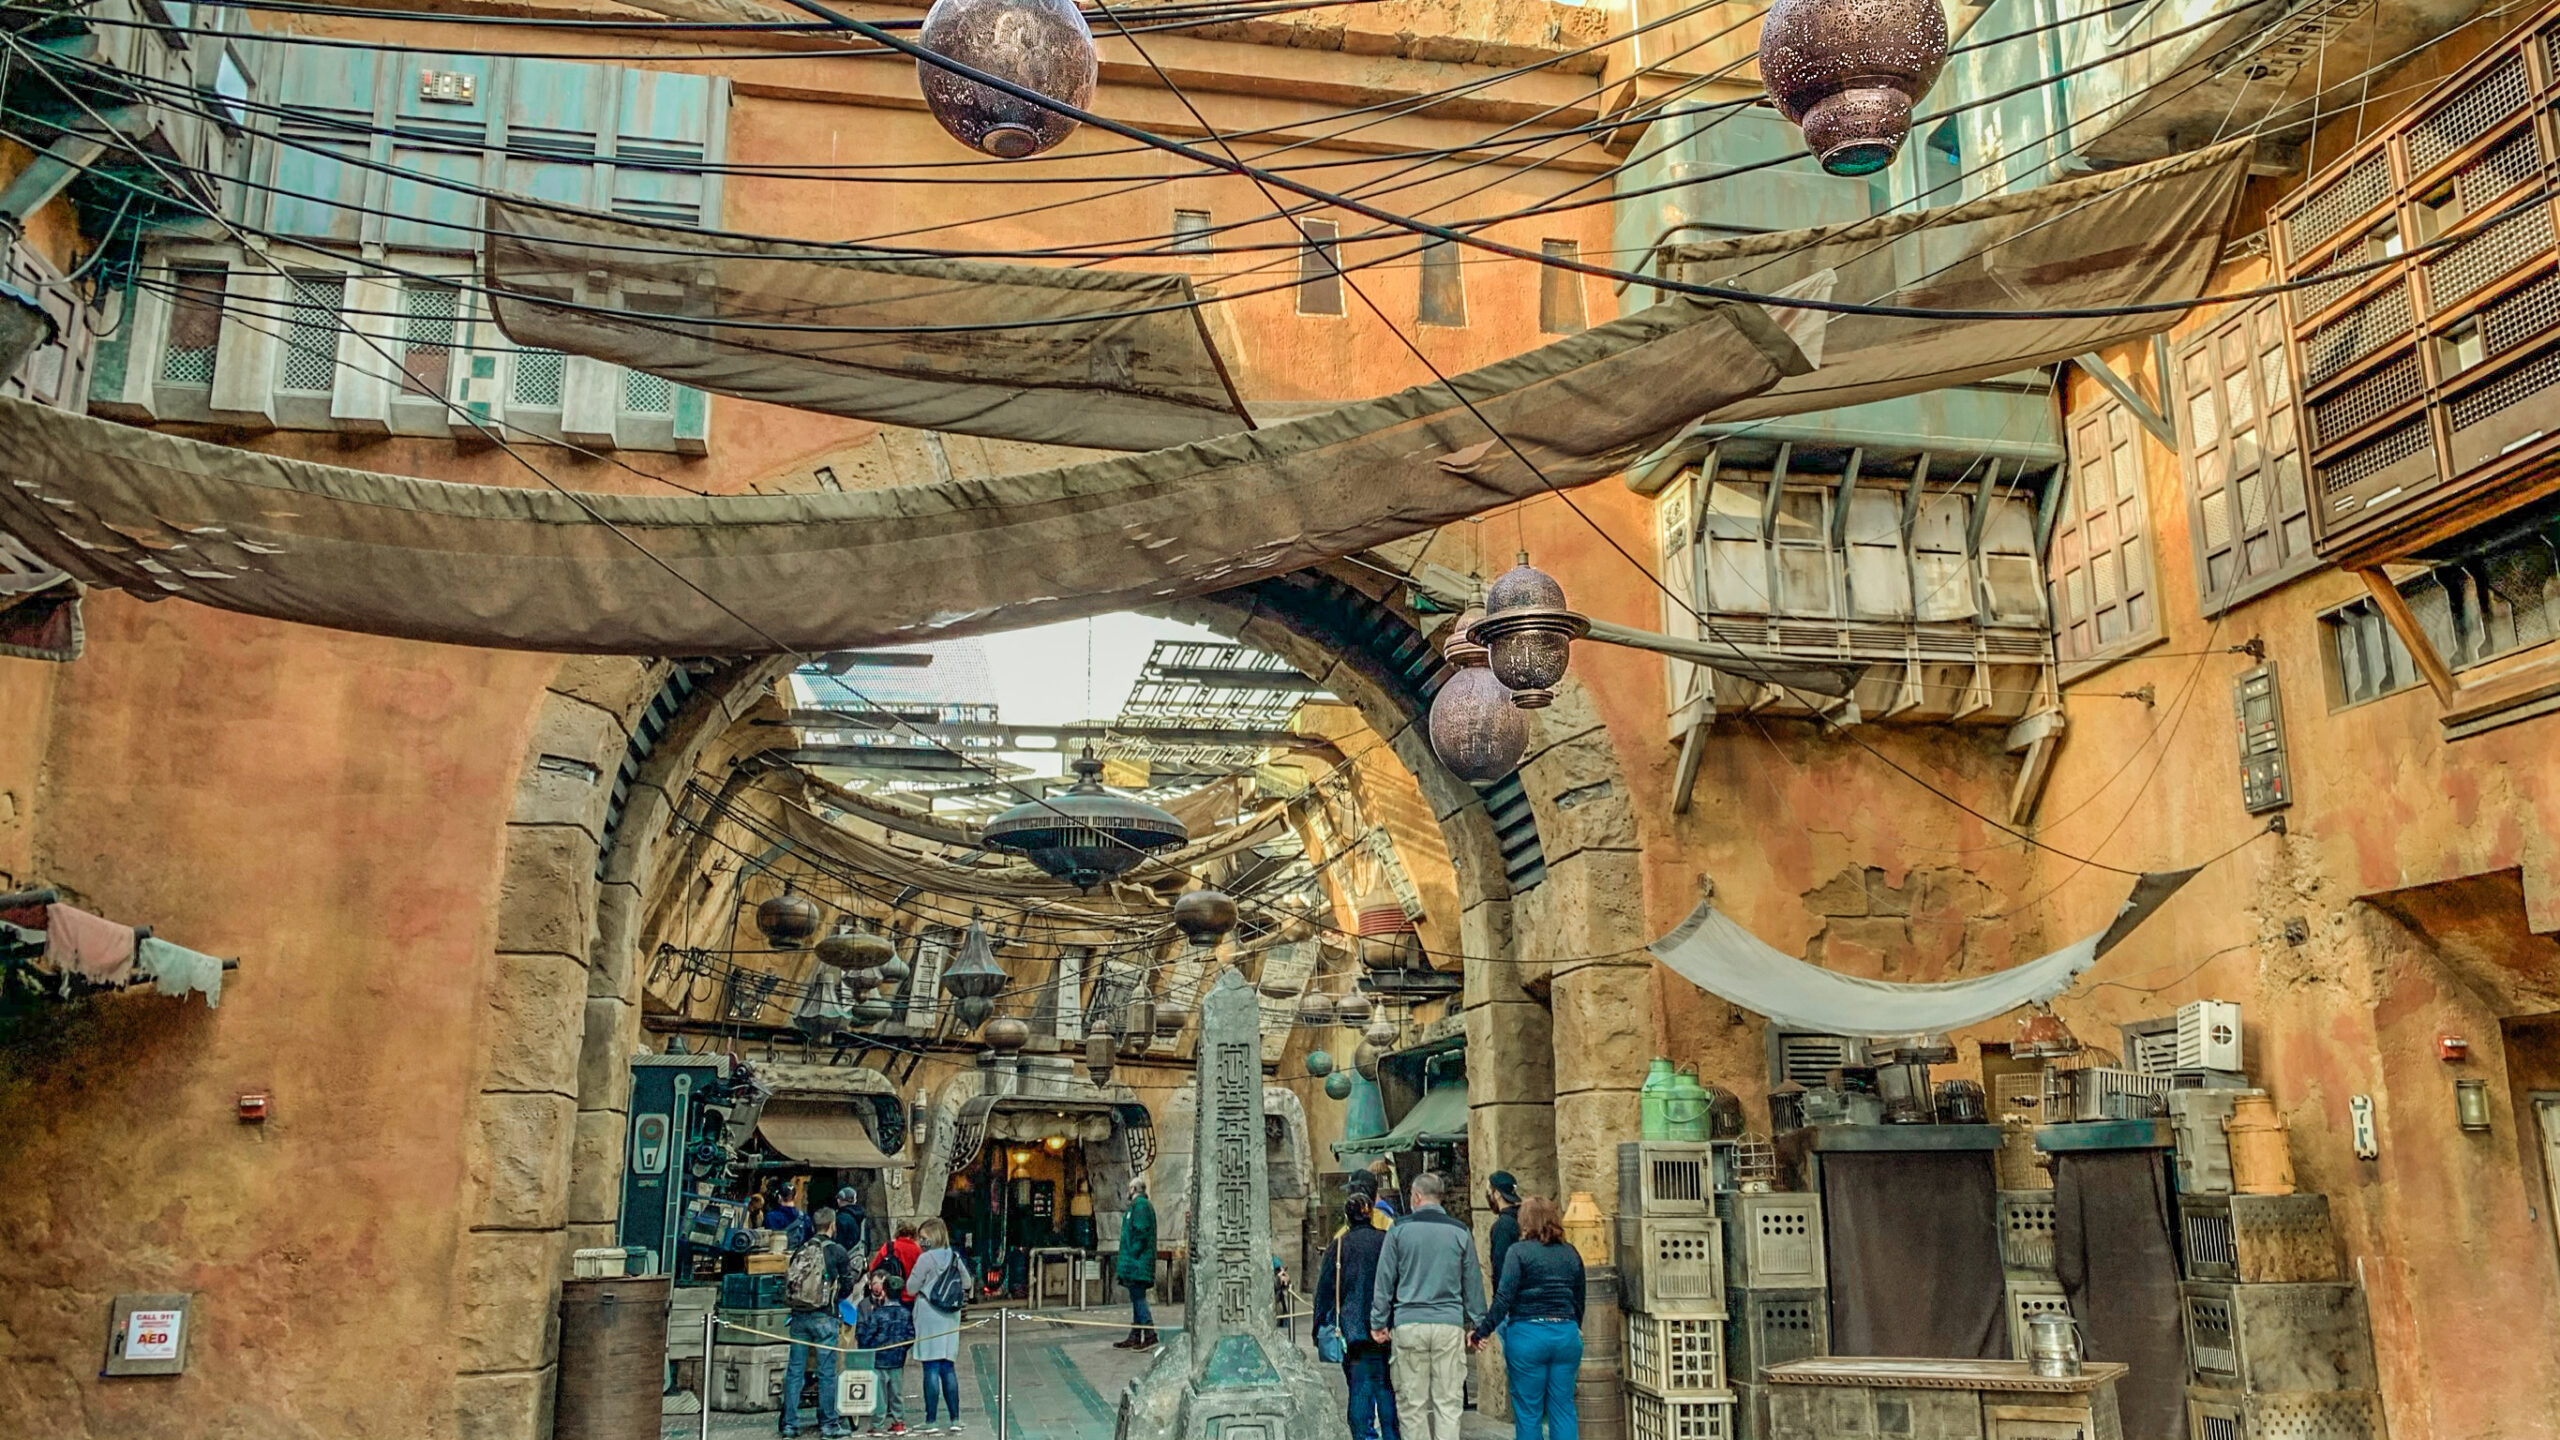 Inside Batuu at Disney's Star Wars Land, one of the best experiences at Disney Worl.d